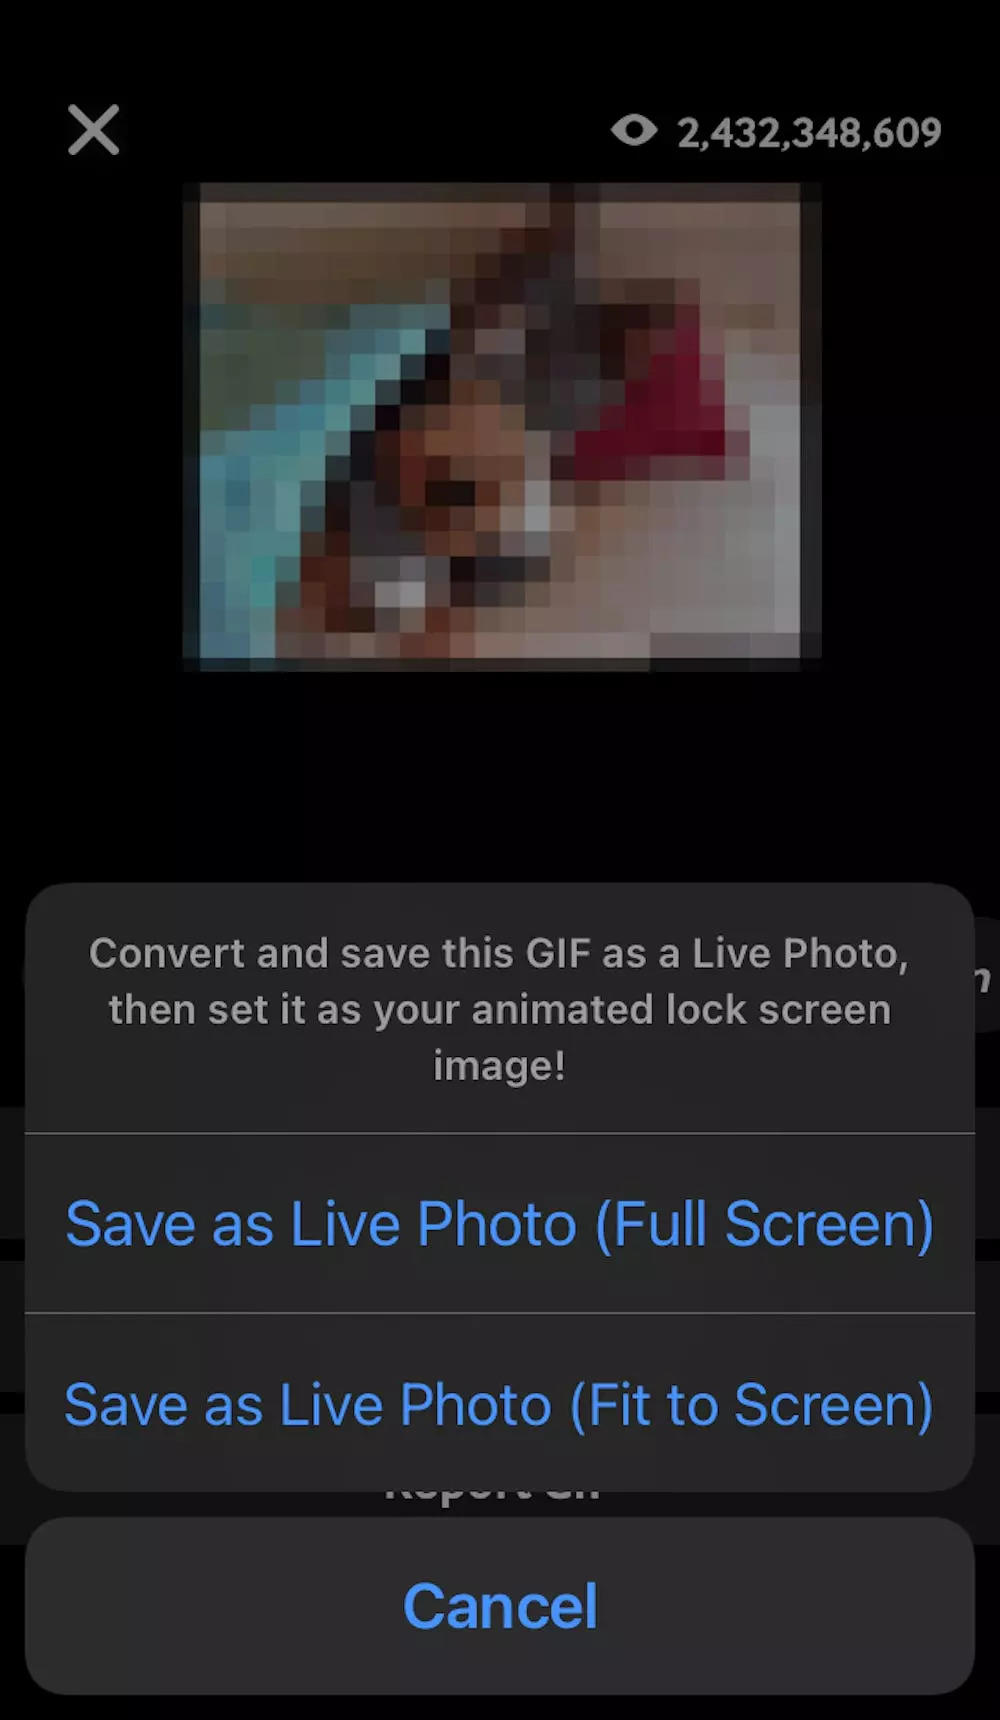 How to Set a Gif as a Live Wallpaper on Your iPhone?